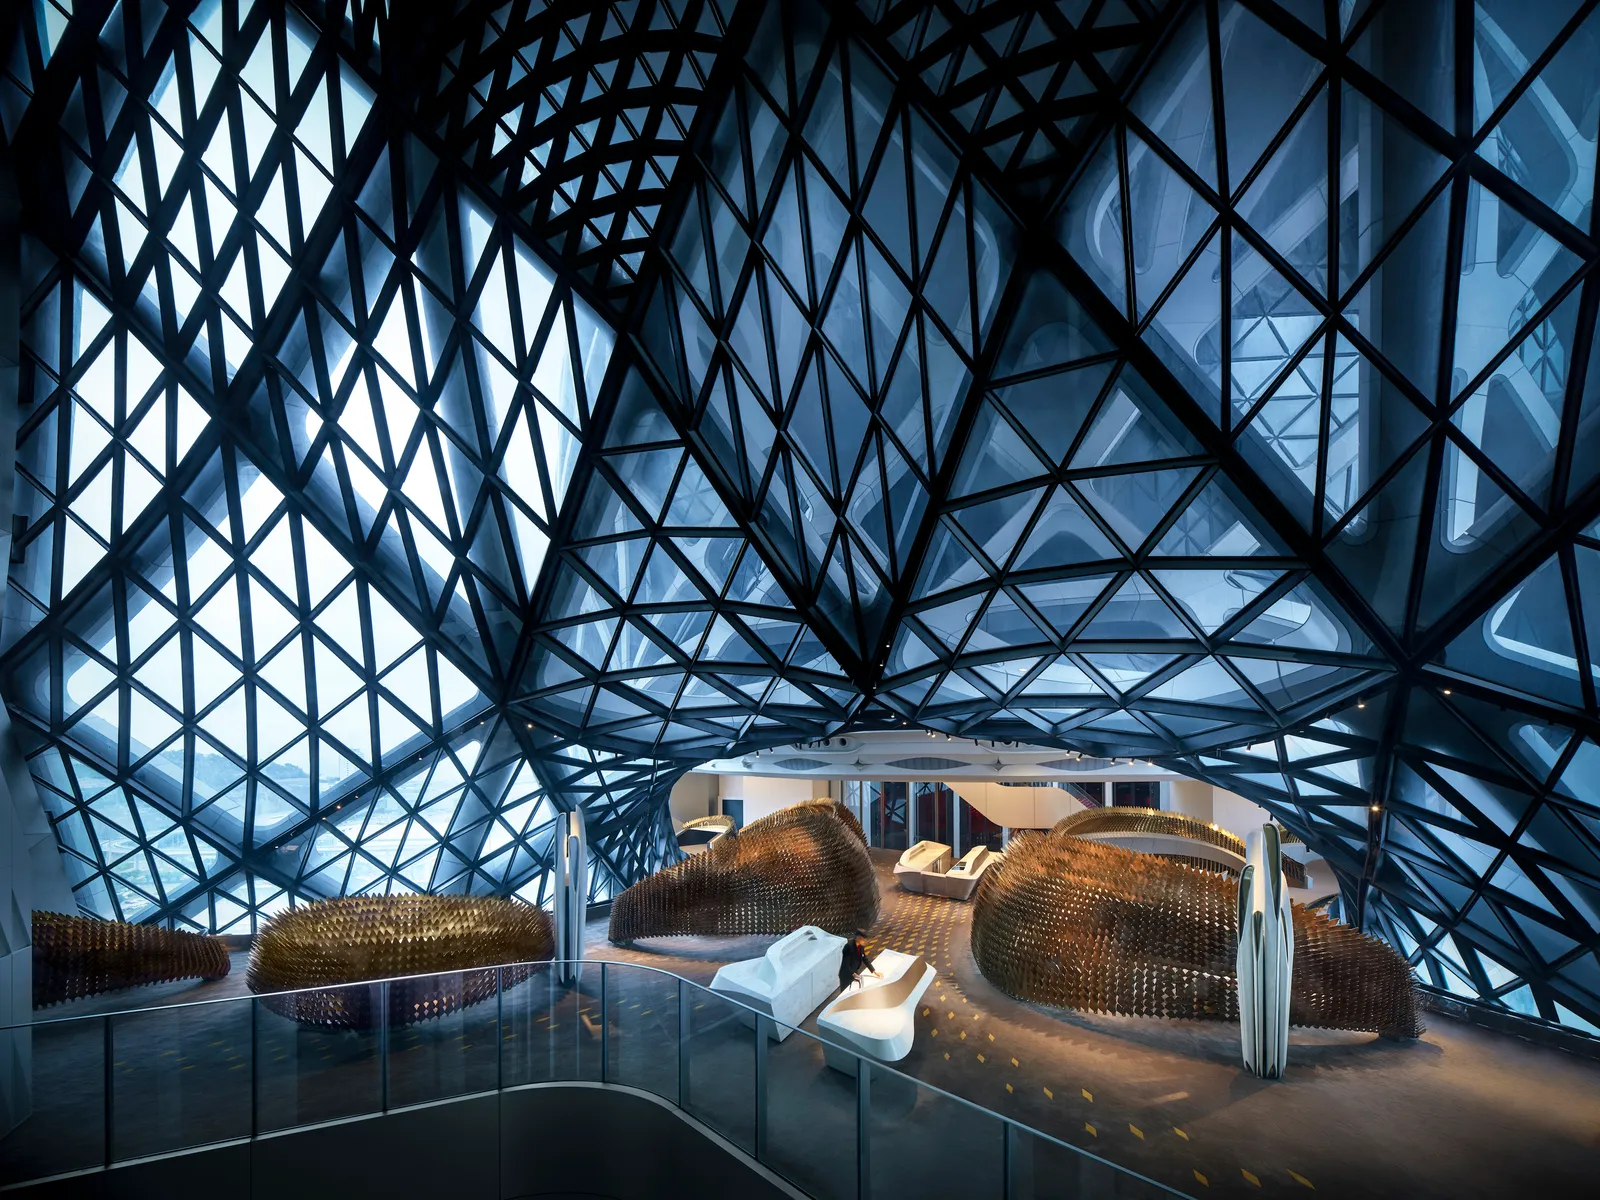 the interiors of Morpheus hotel by ZHA with its dark exoskeleton structures